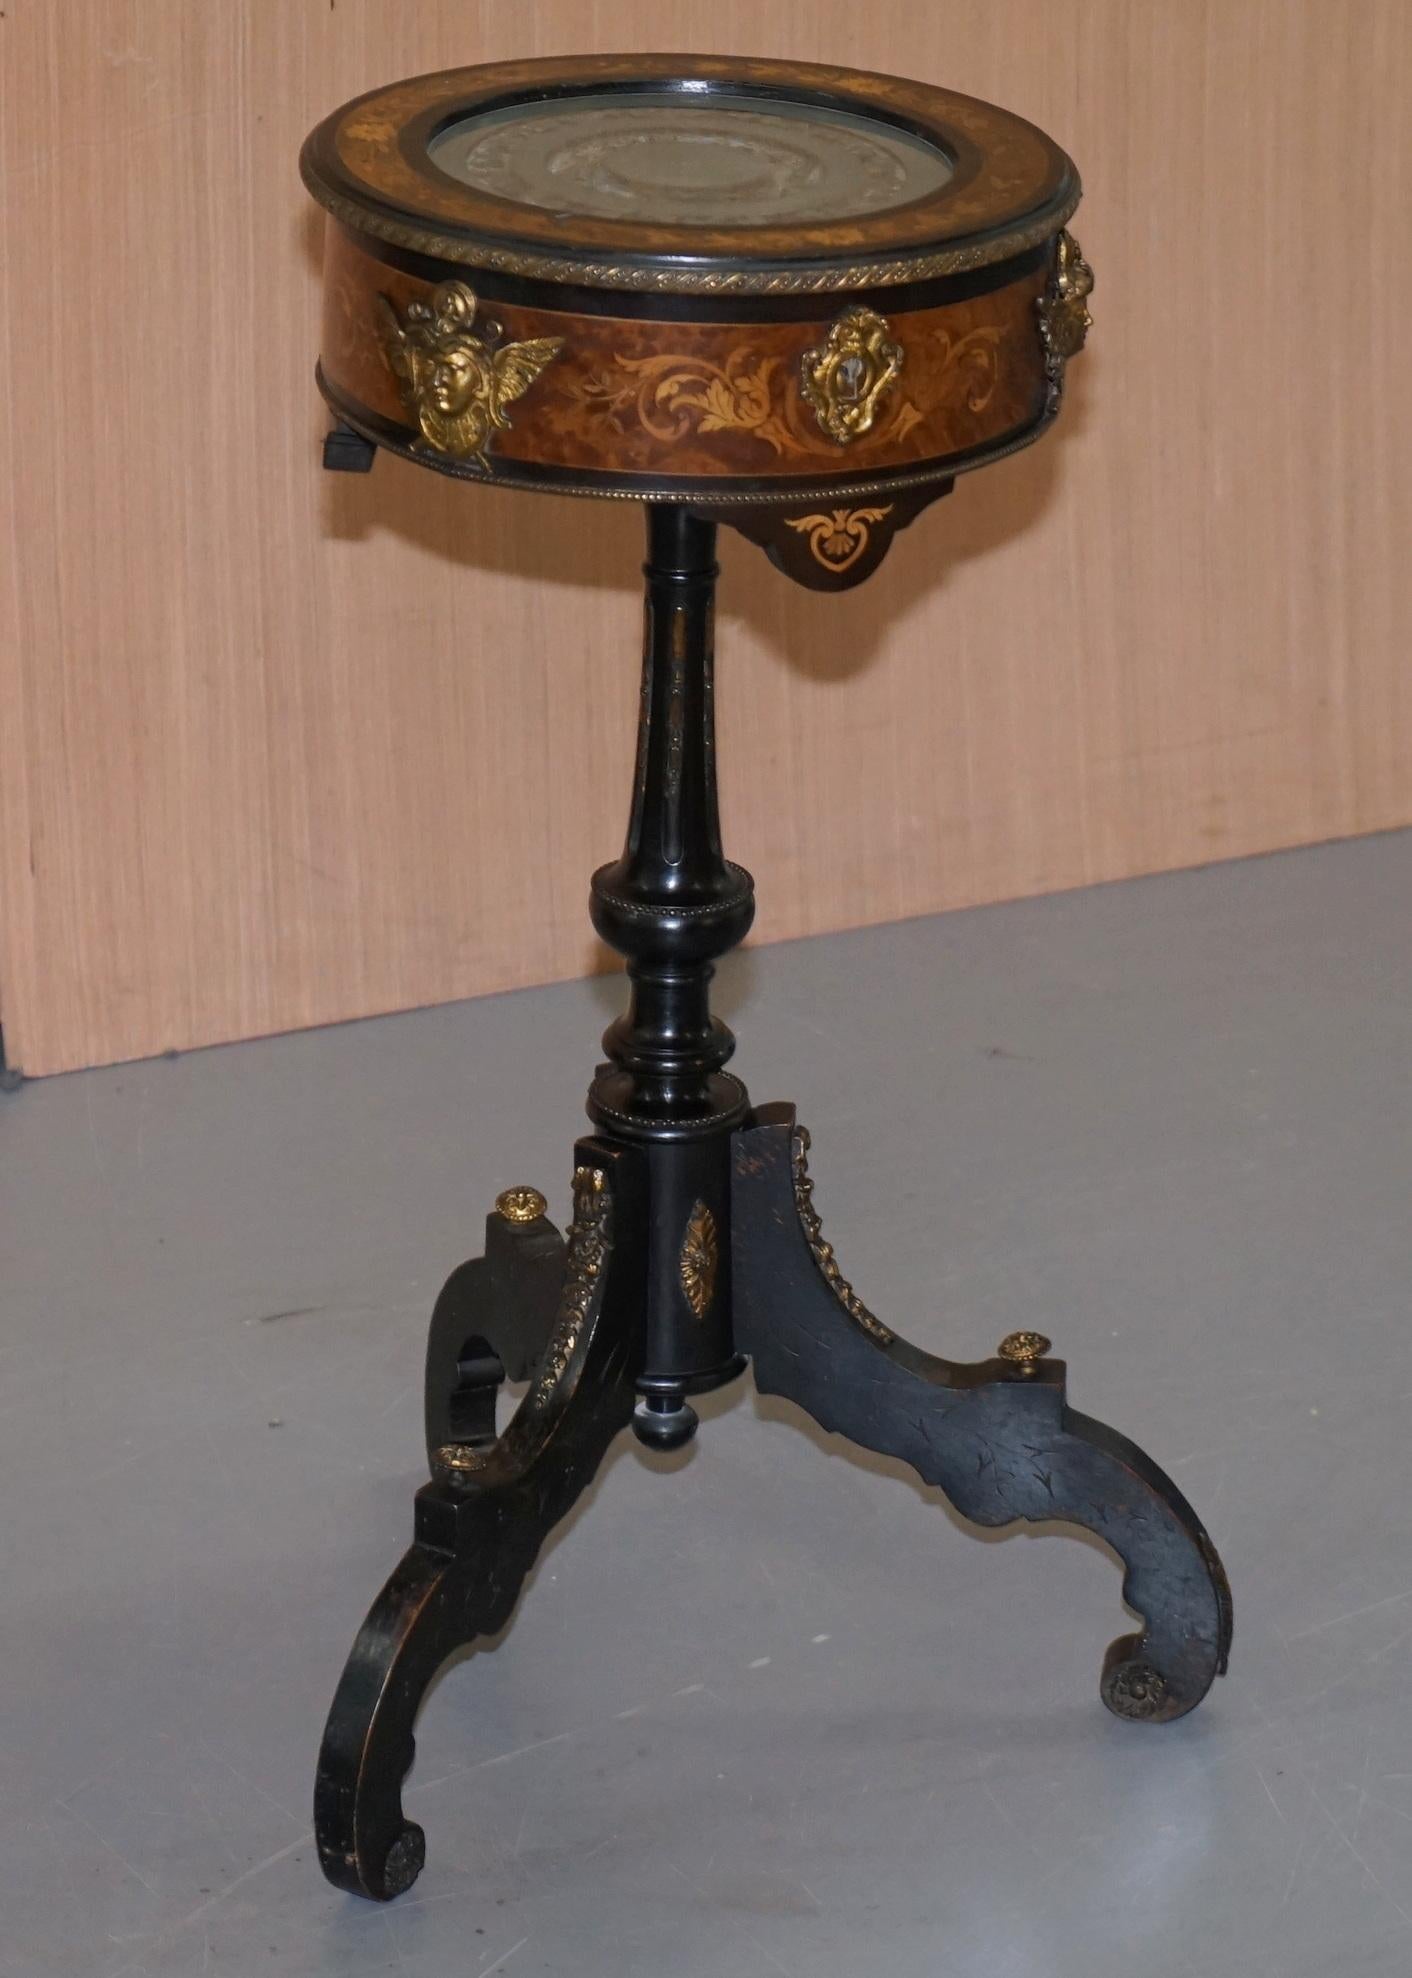 We are delighted to offer this stunning original 18th century Louis XVI Bijouterie Vitrine side table with original silk lining

A truly stunning and remarkable table, the timber patina is period and original, its ebonised with gilt metal bronze